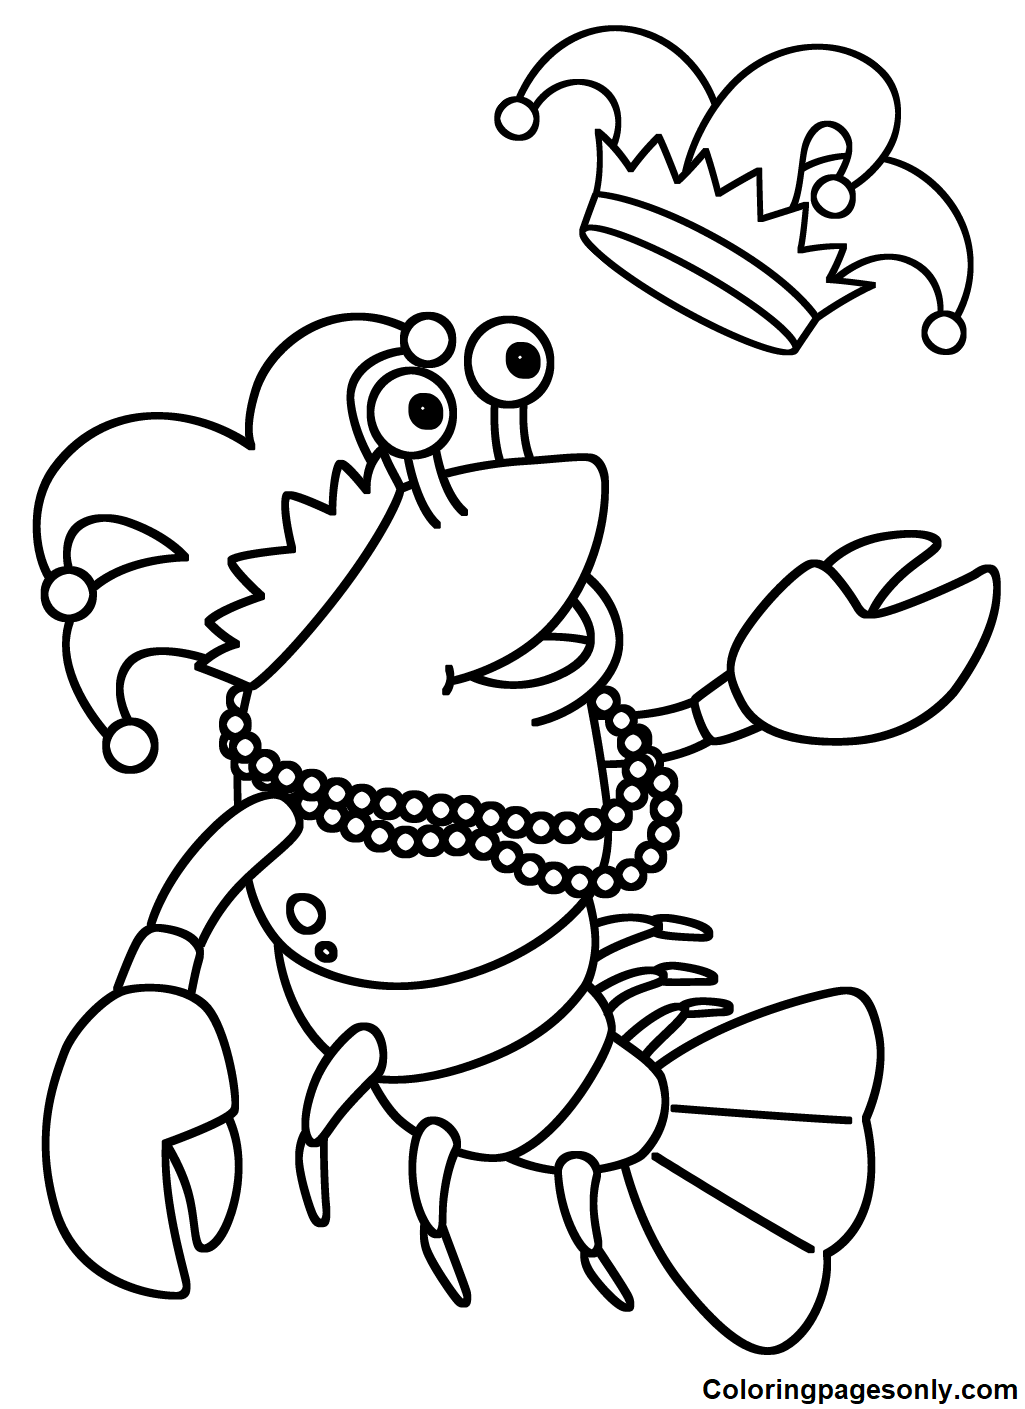 Mardi Gras Jester Crawfish Coloring Pages